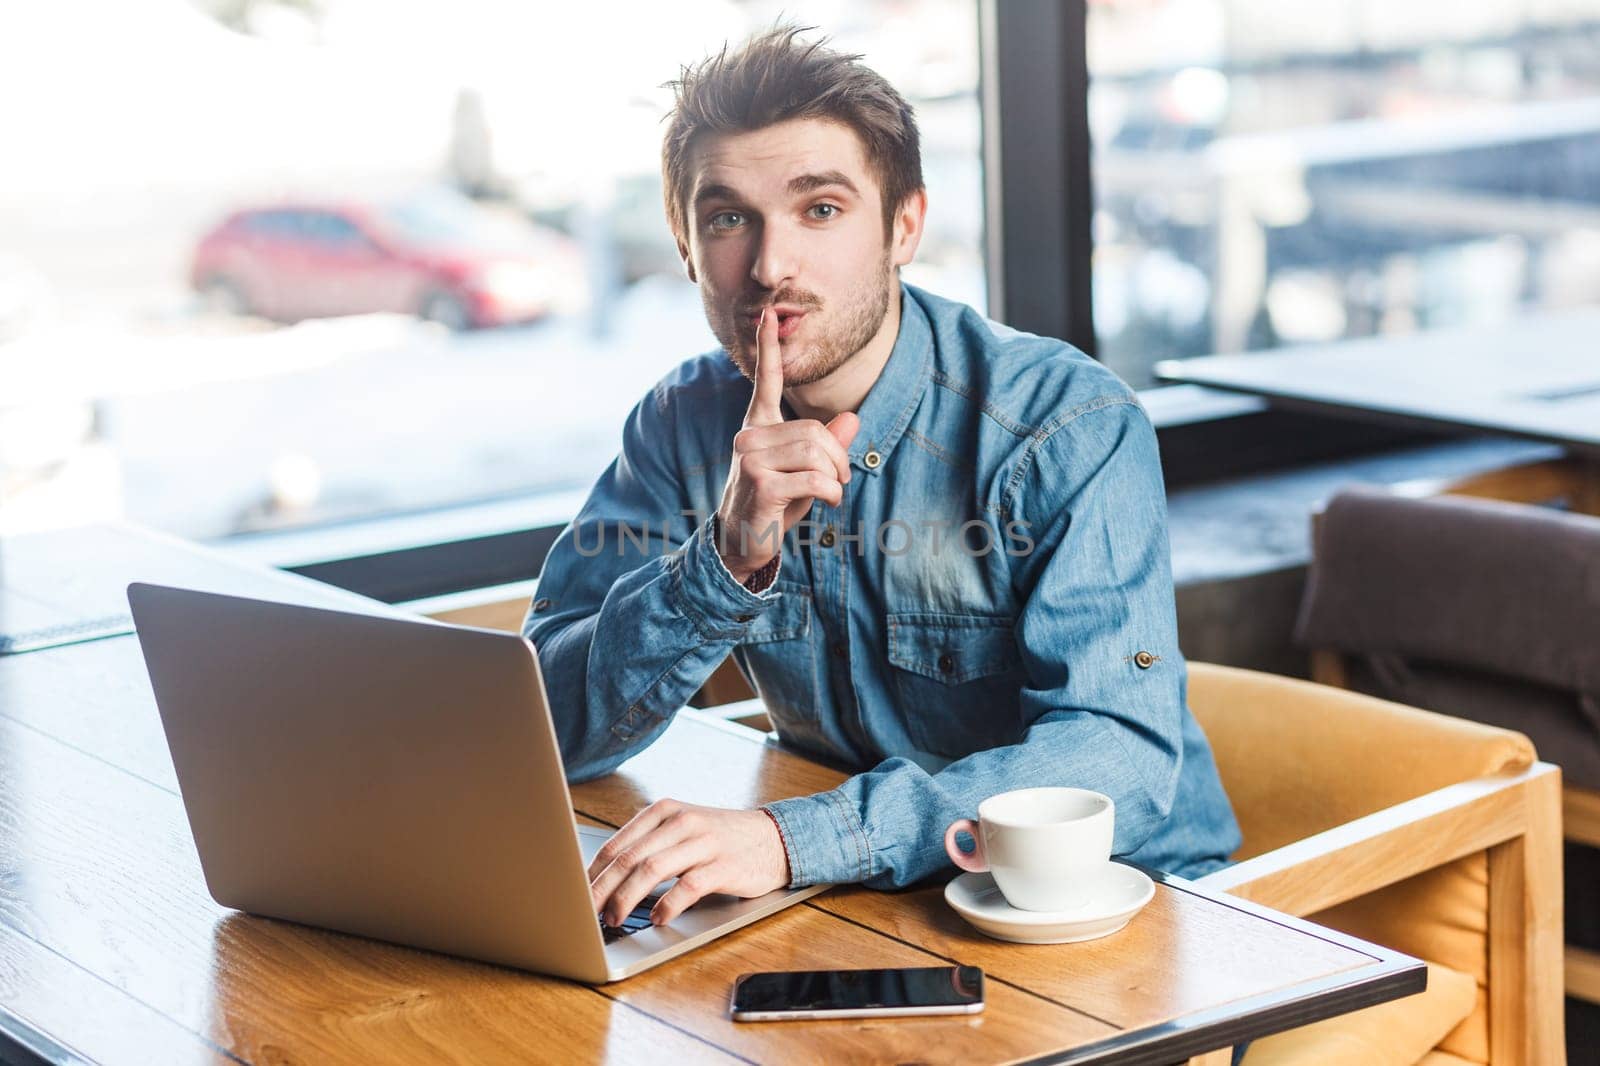 Portrait of handsome bearded young man freelancer in blue jeans shirt working on laptop, showing shh gesture, looking at camera, asking not to make noise. Indoor shot near big window, cafe background.